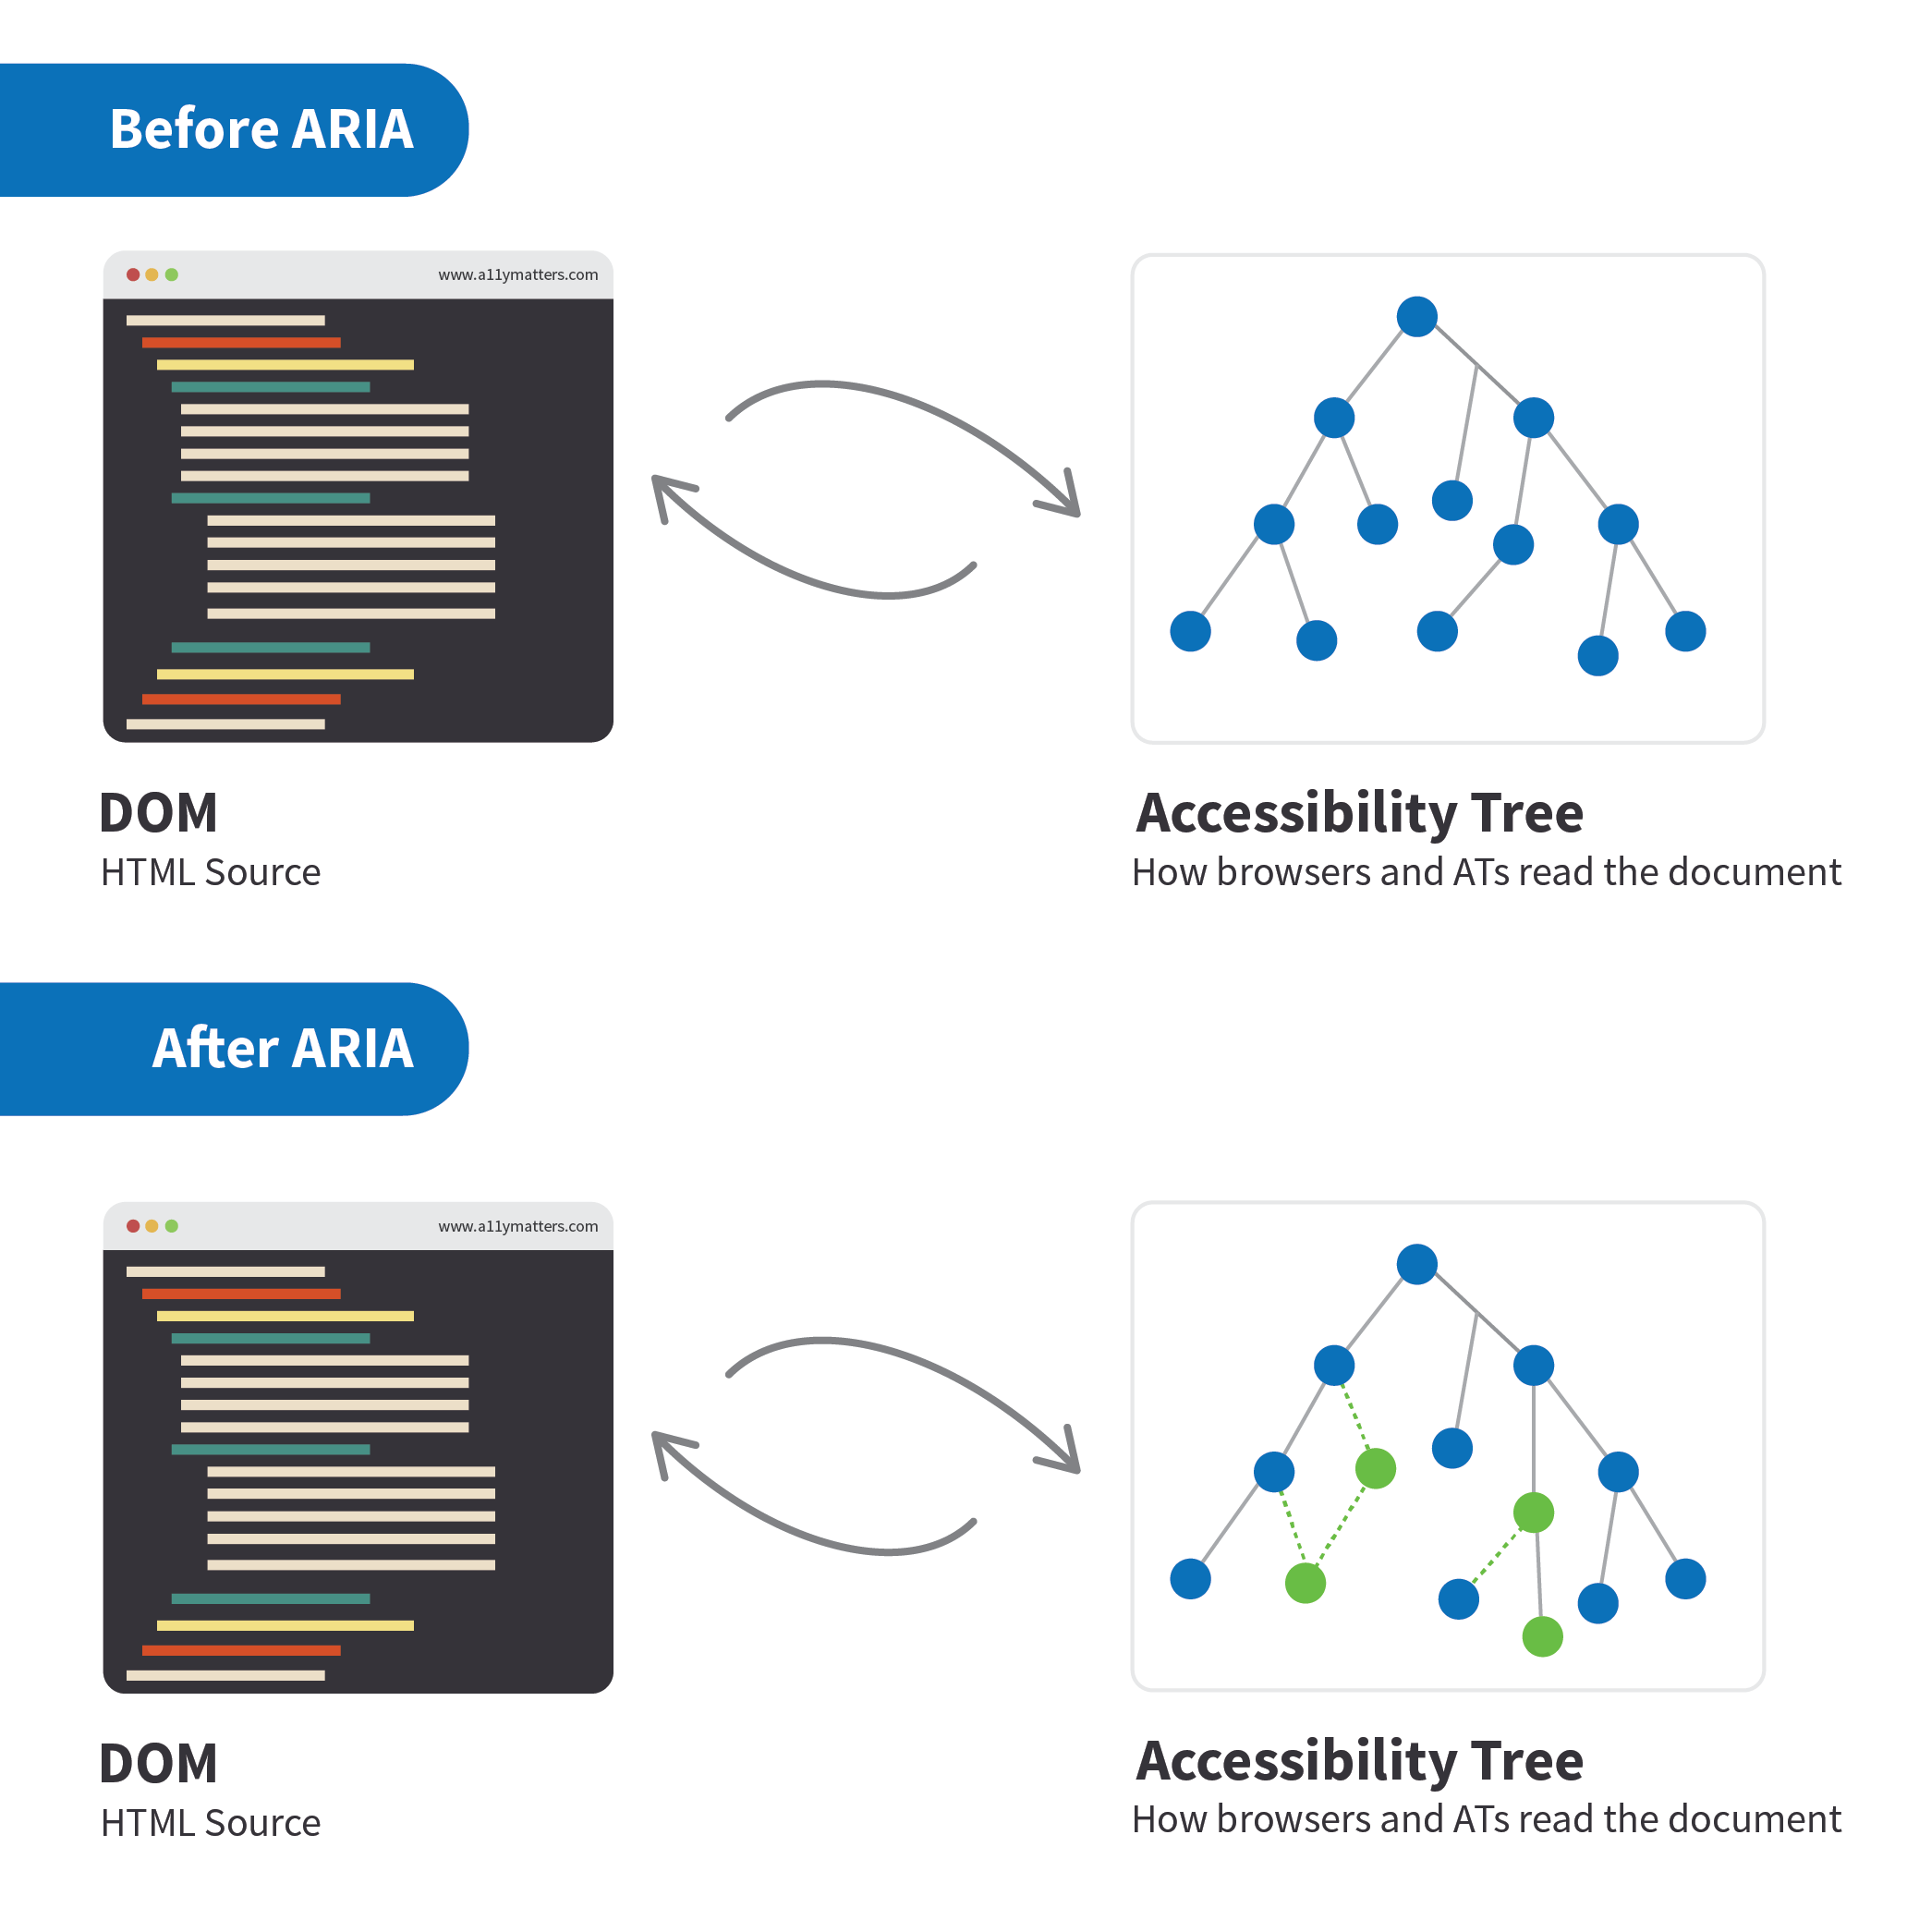 Comparing the accessibility before and after using ARIA